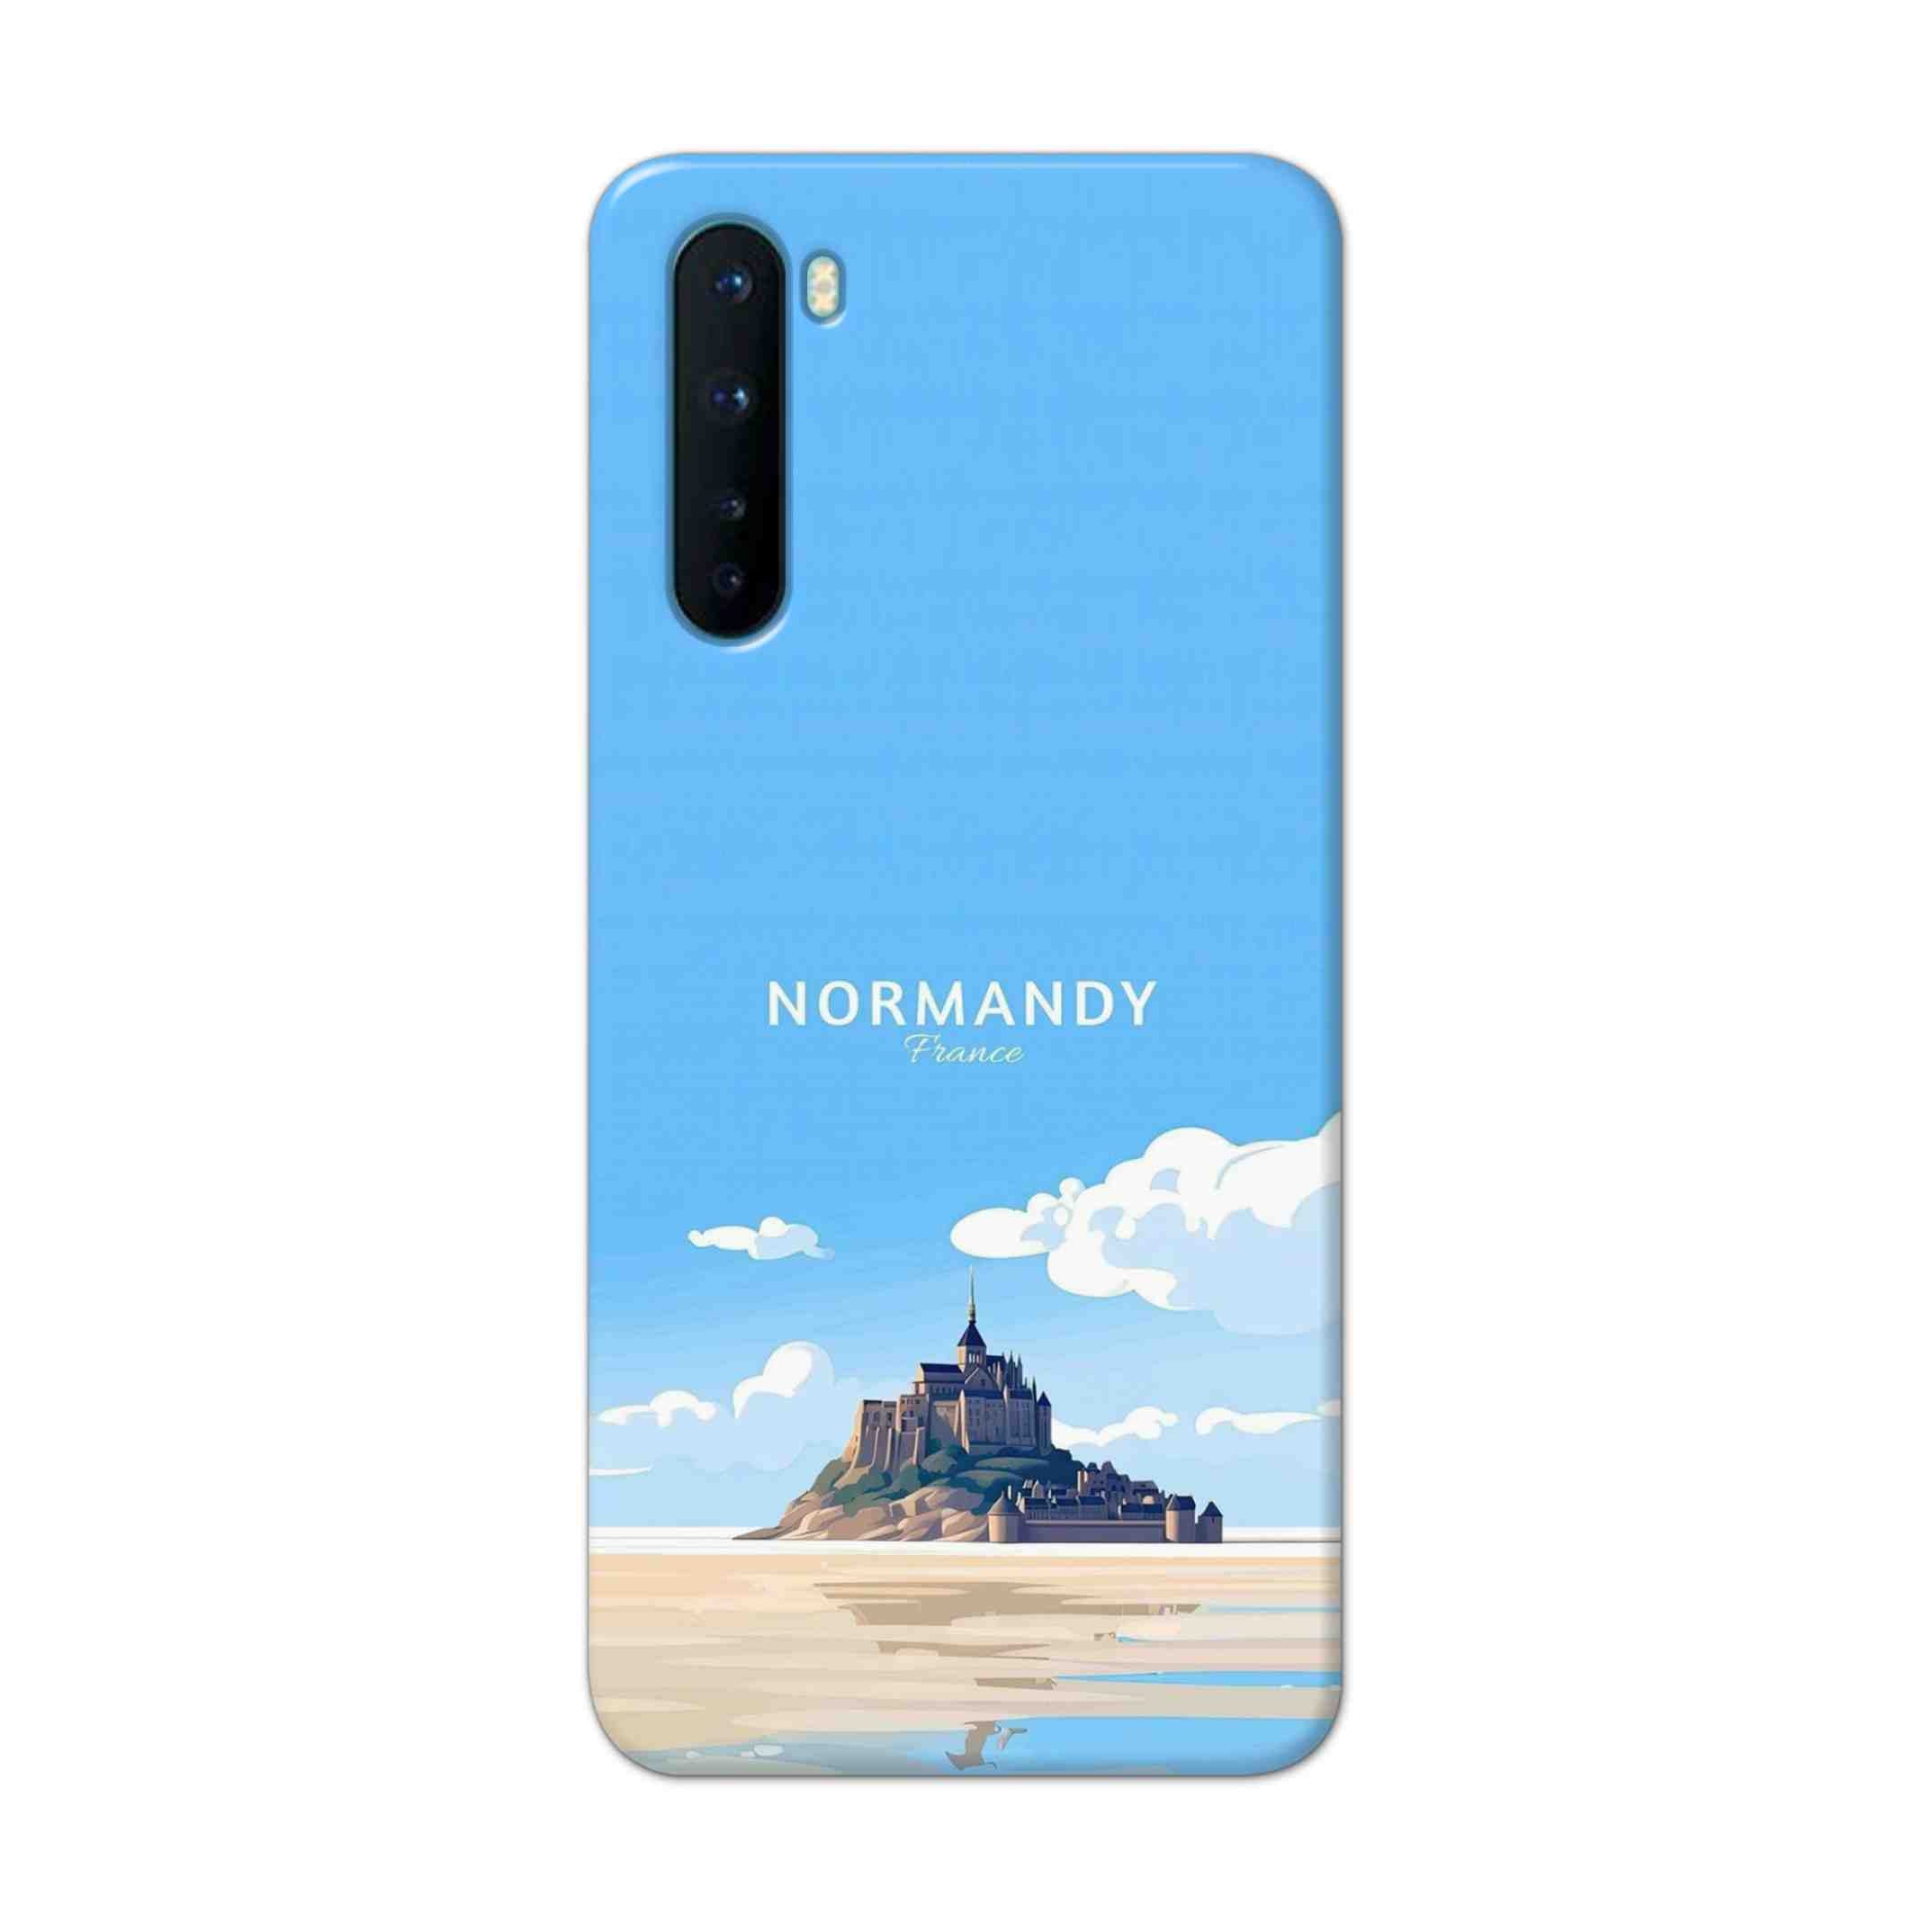 Buy Normandy Hard Back Mobile Phone Case Cover For OnePlus Nord Online